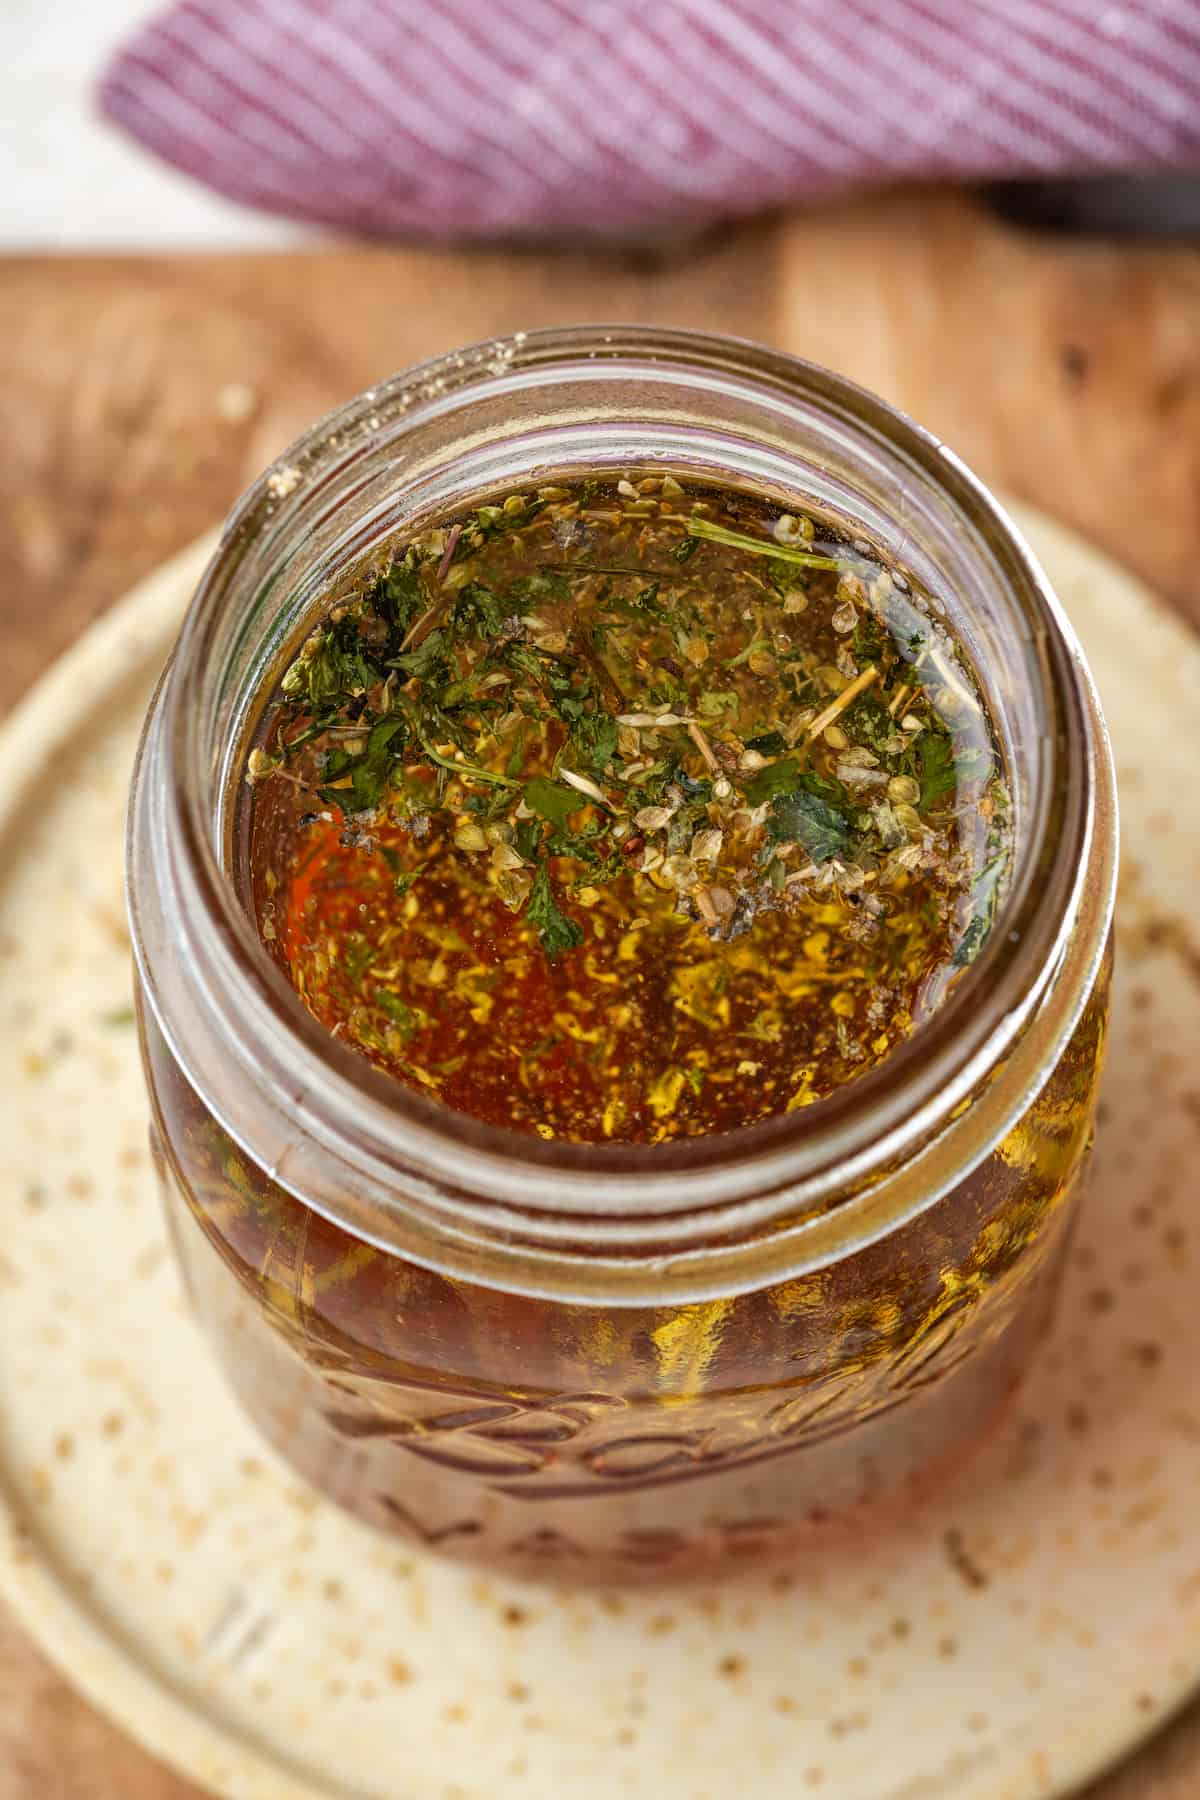 A homemade salad dressing being mixed together in a large glass jar.